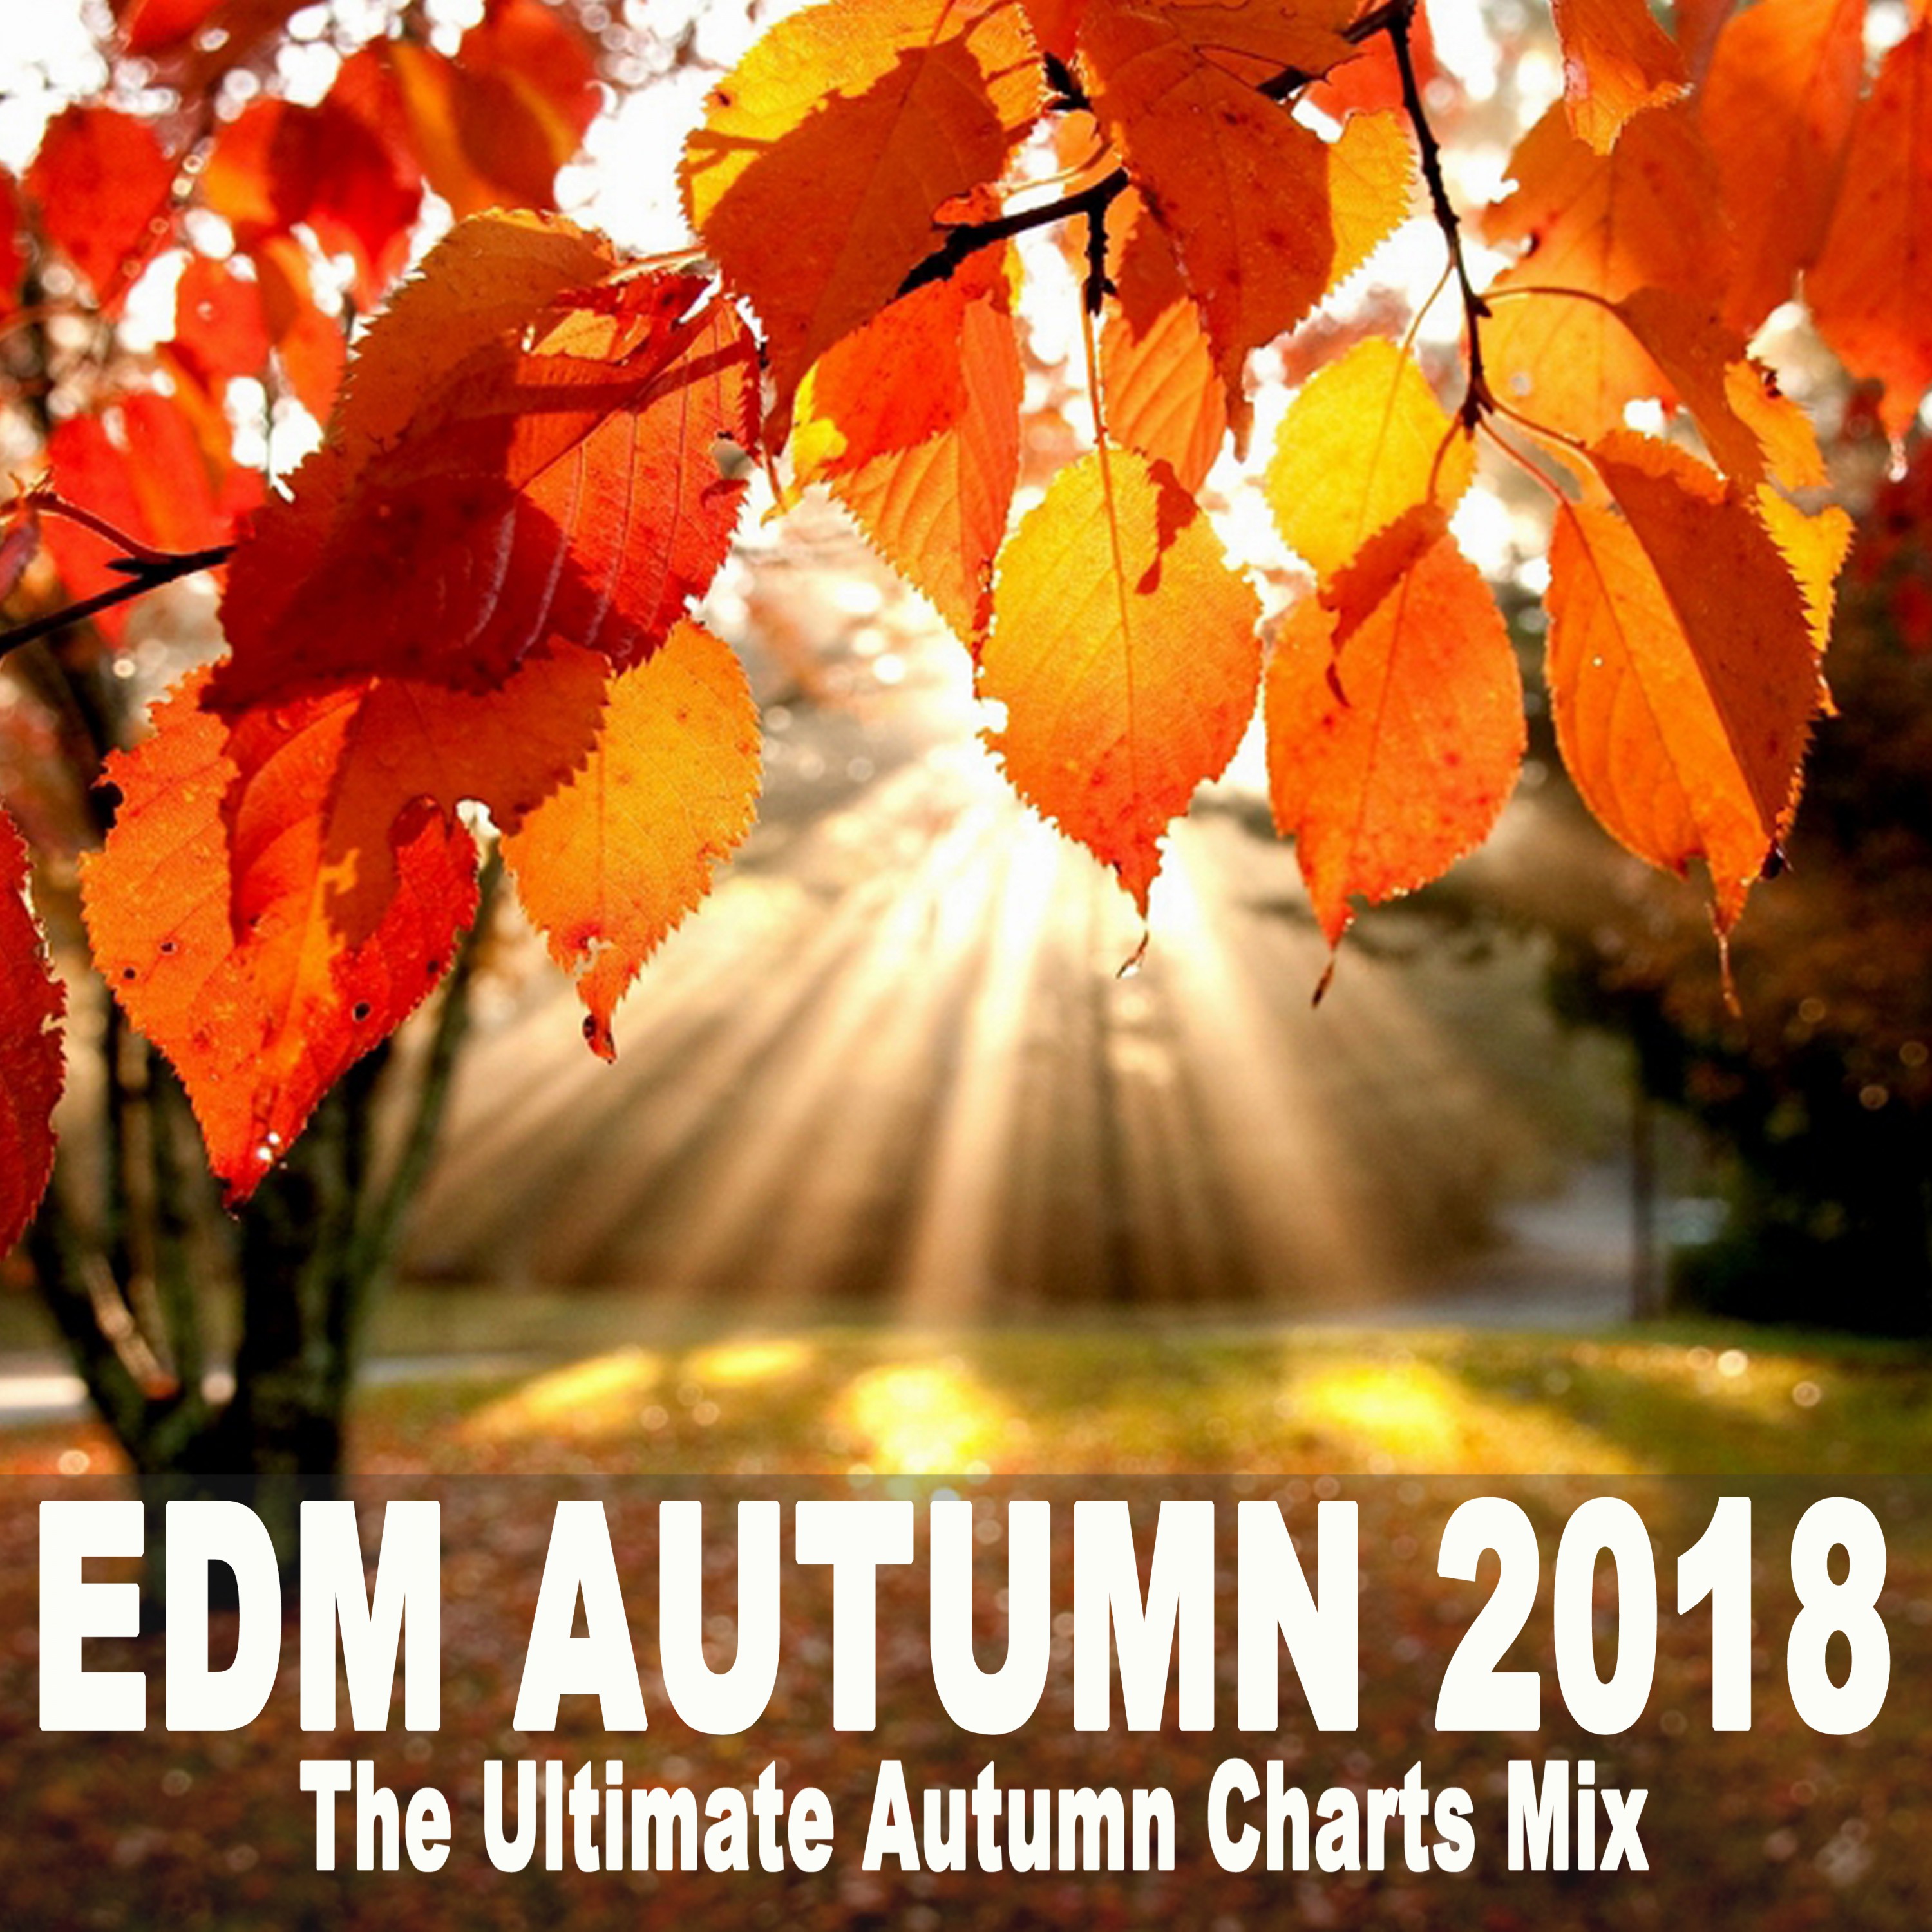 EDM Autumn 2018 - The Ultimate Autumn Charts Mix (The Best EDM, Trap & Dirty House)